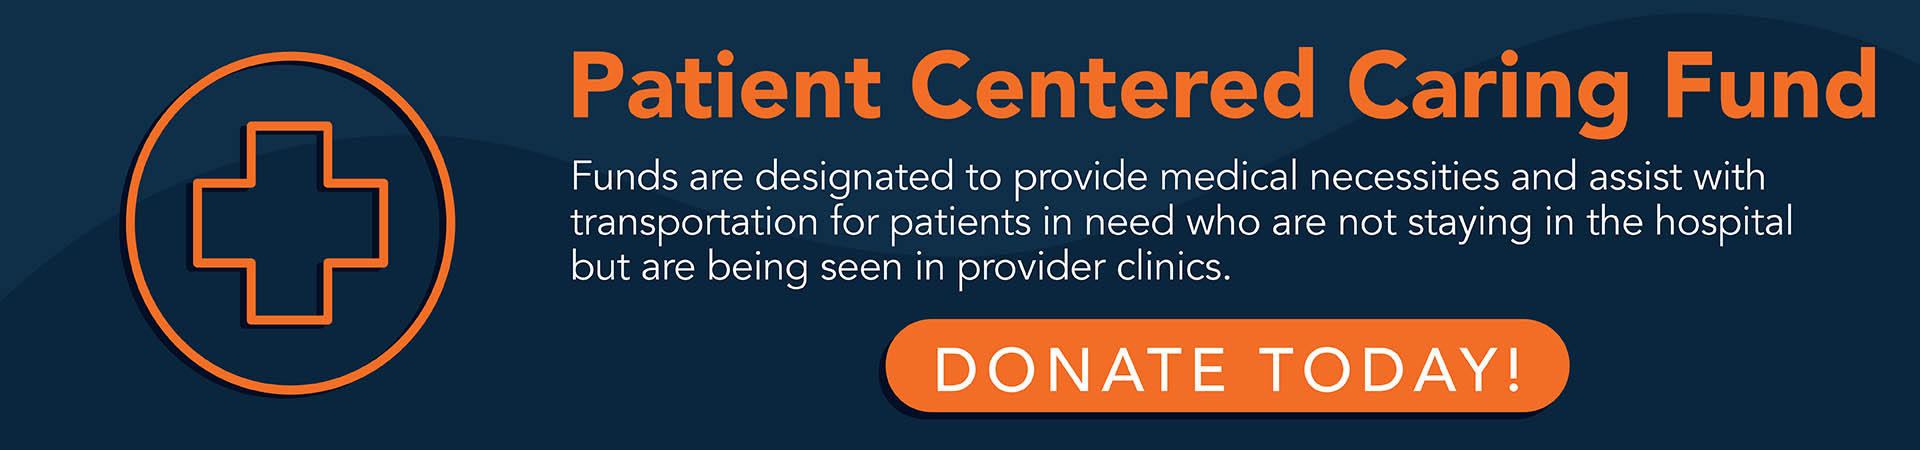 Patient Centered Caring Fund